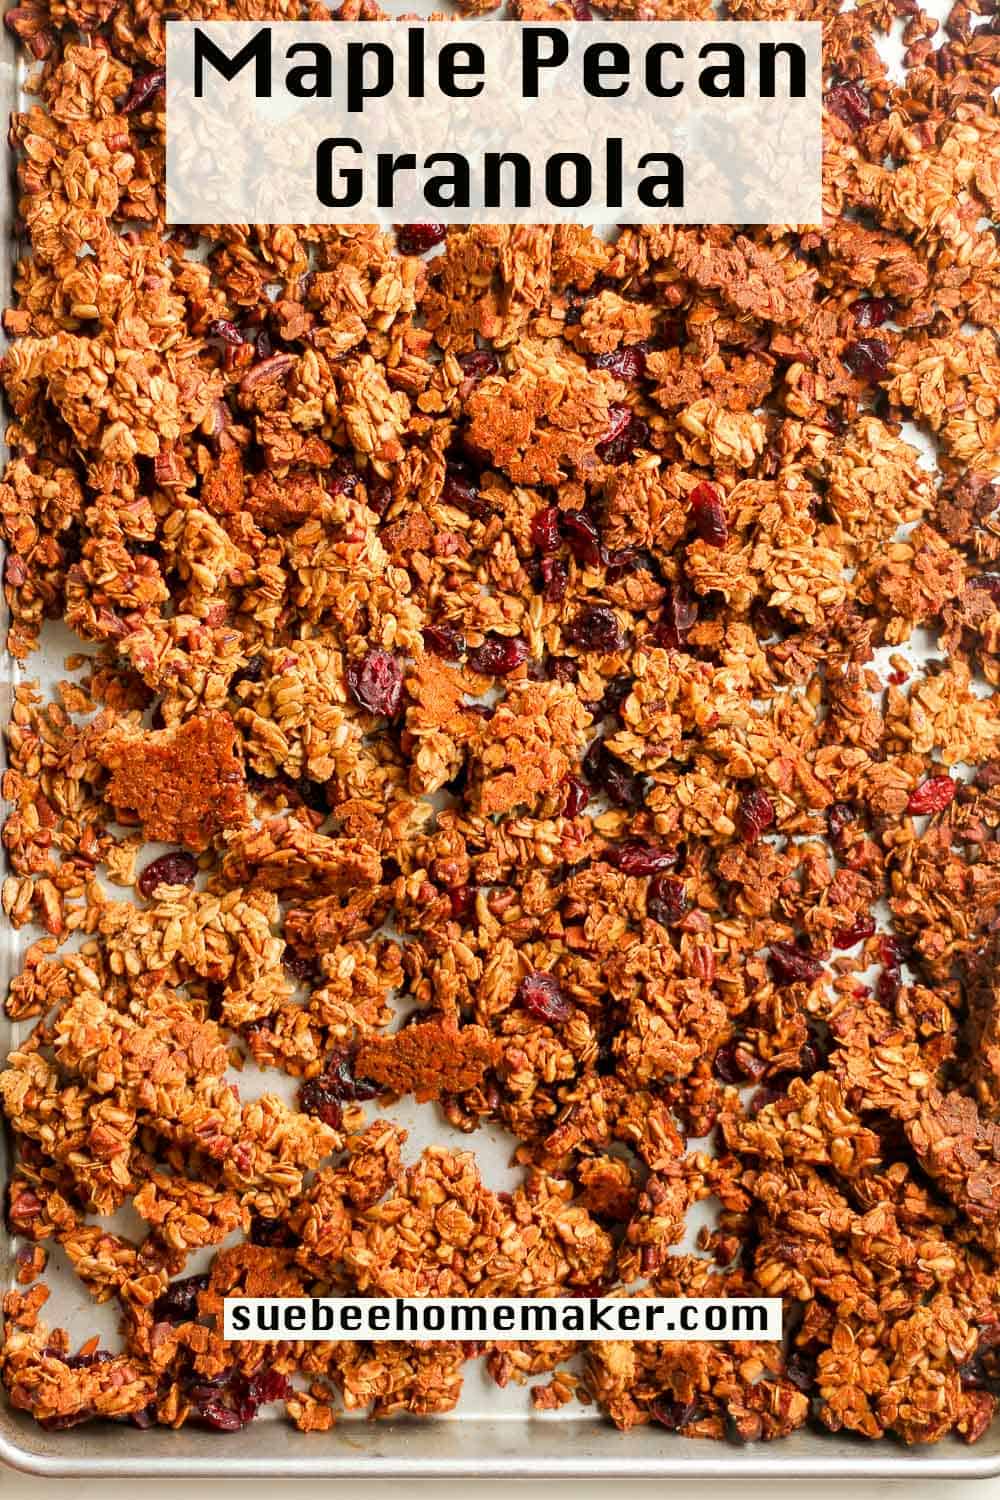 A large sheet pan of baked granola with dried cranberries.